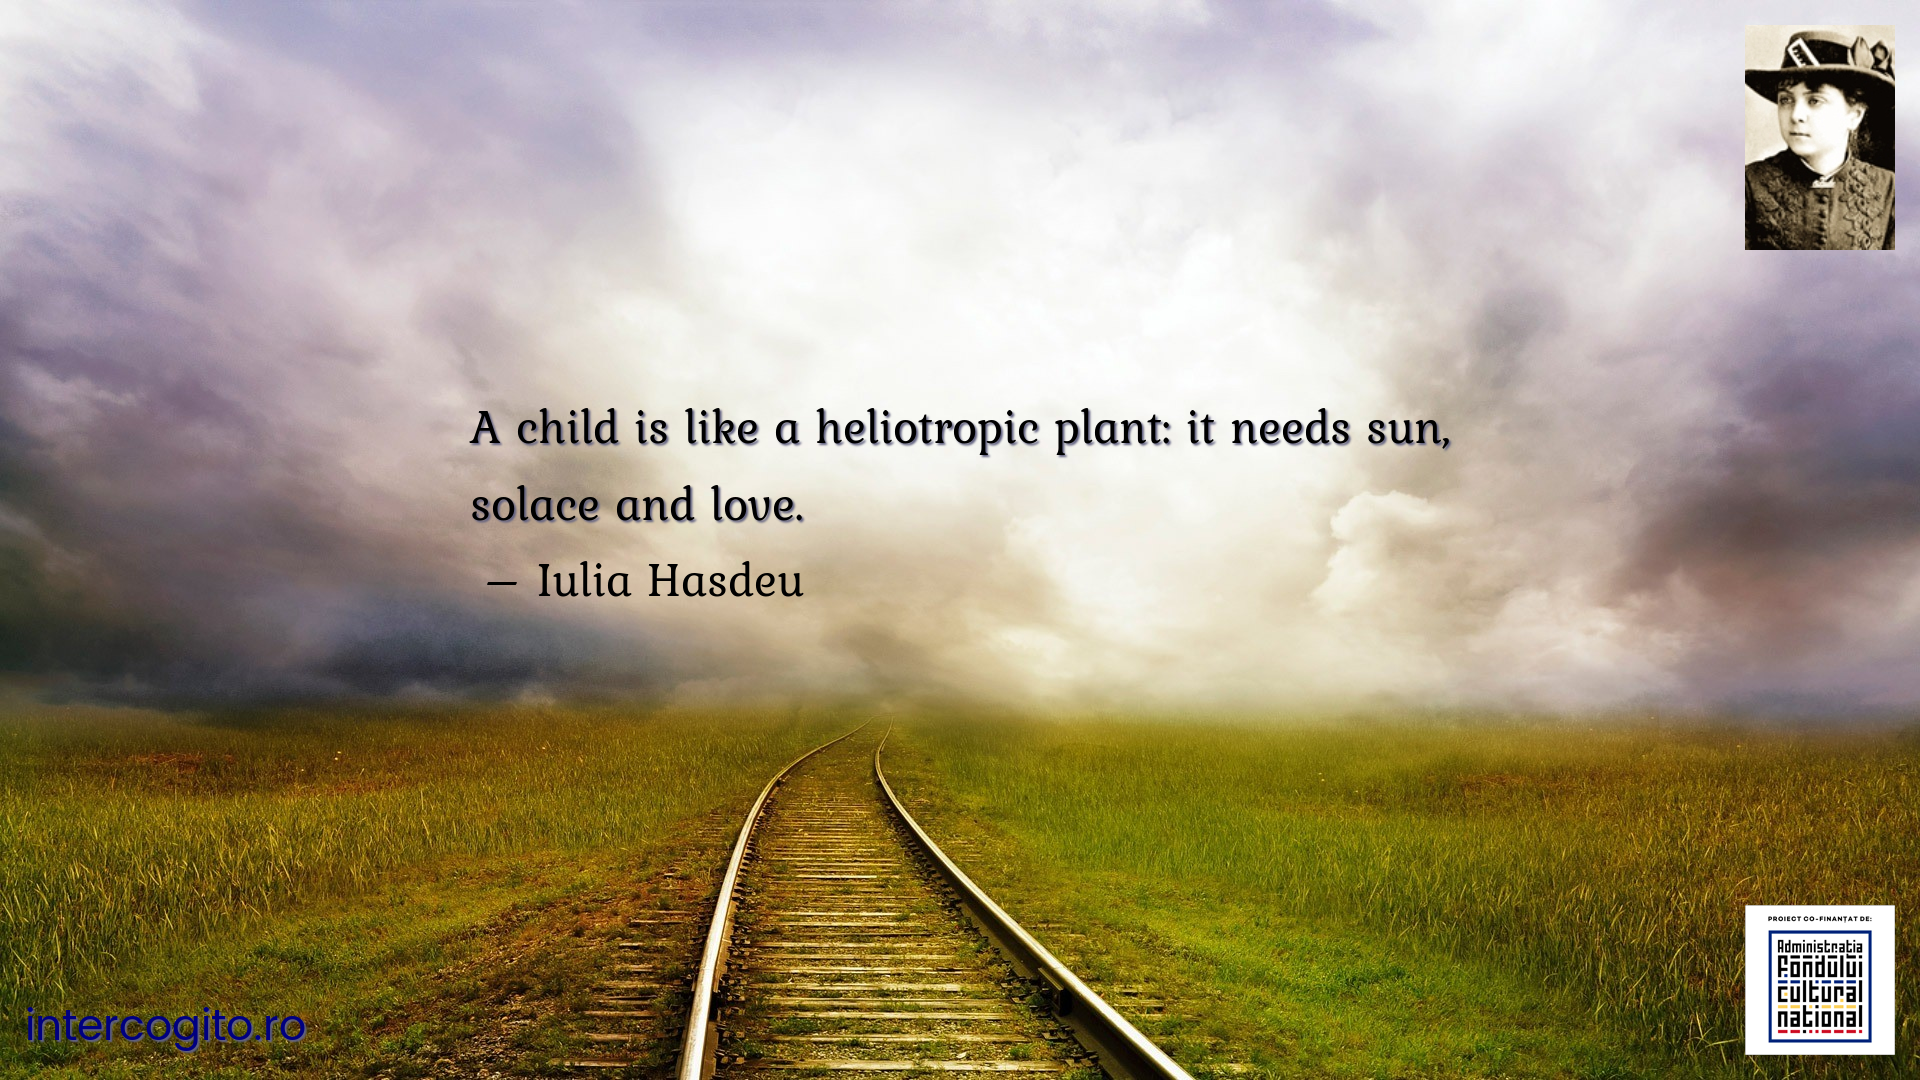 A child is like a heliotropic plant: it needs sun, solace and love.